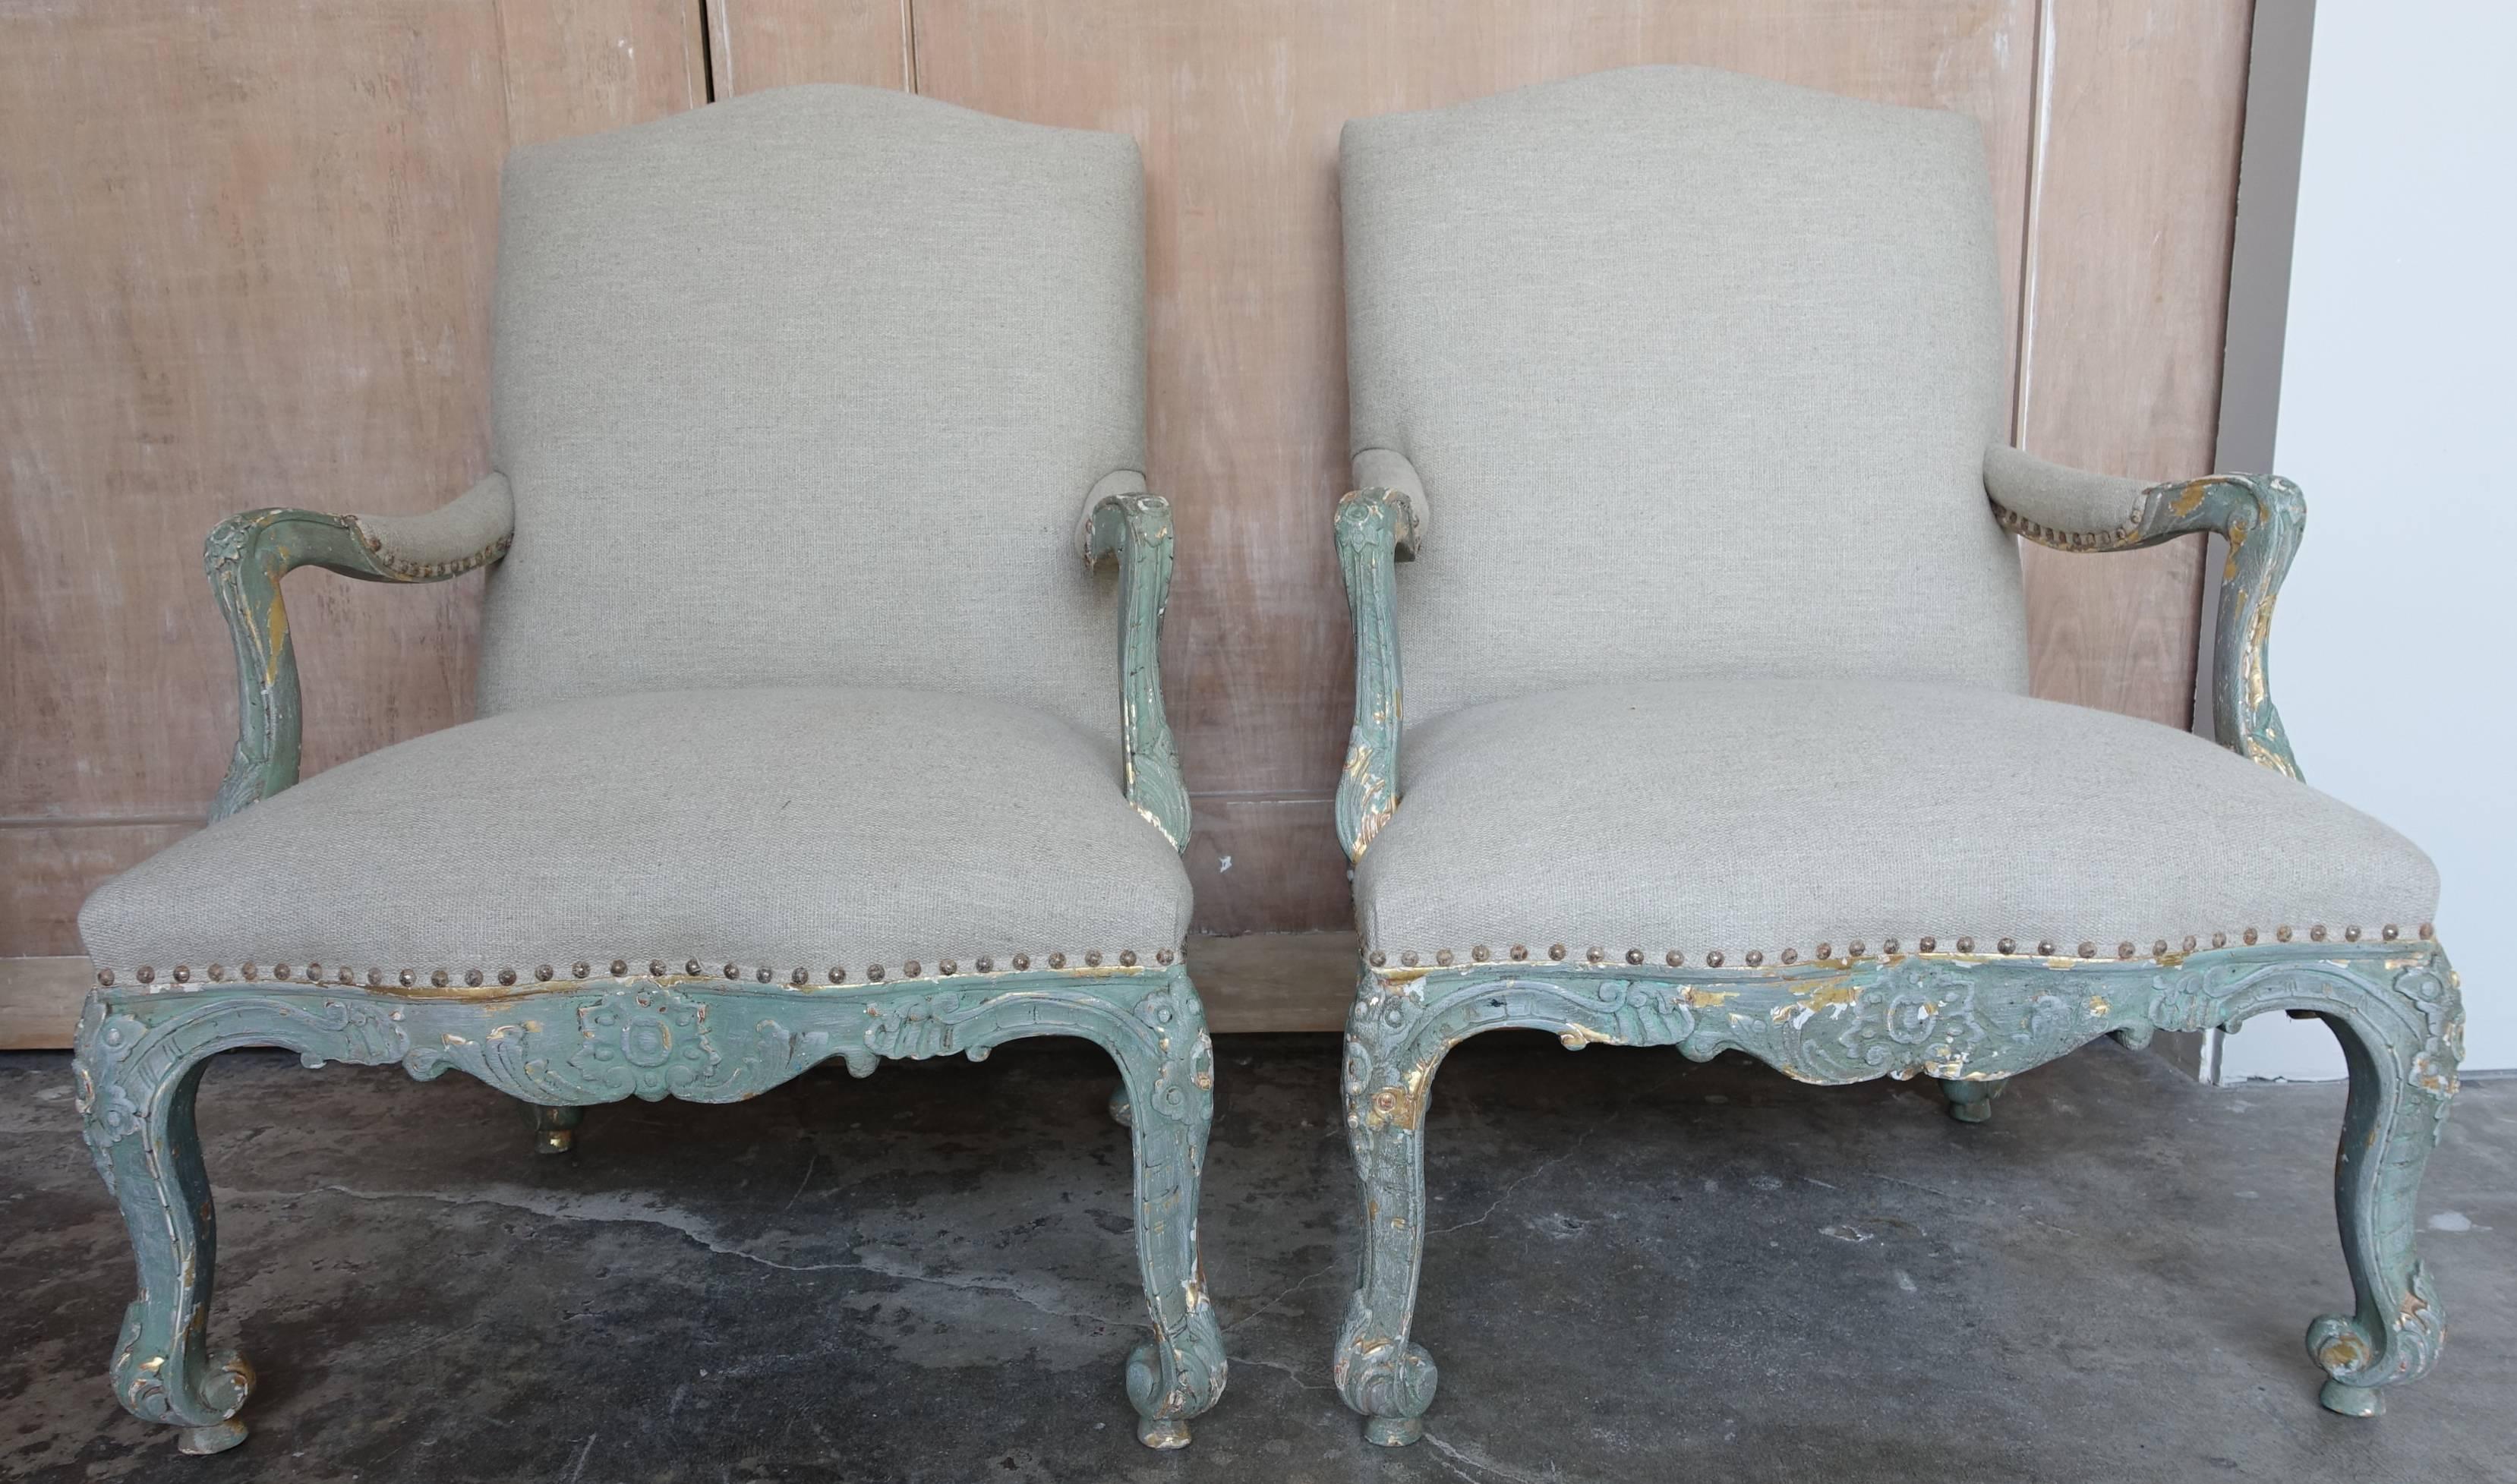 Pair of French aqua painted and 22-karat giltwood carved fauteuils standing on four slight cabriole legs. Newly upholstered in natural grain colored linen with elegant arched back and antiqued nail head trim detail.